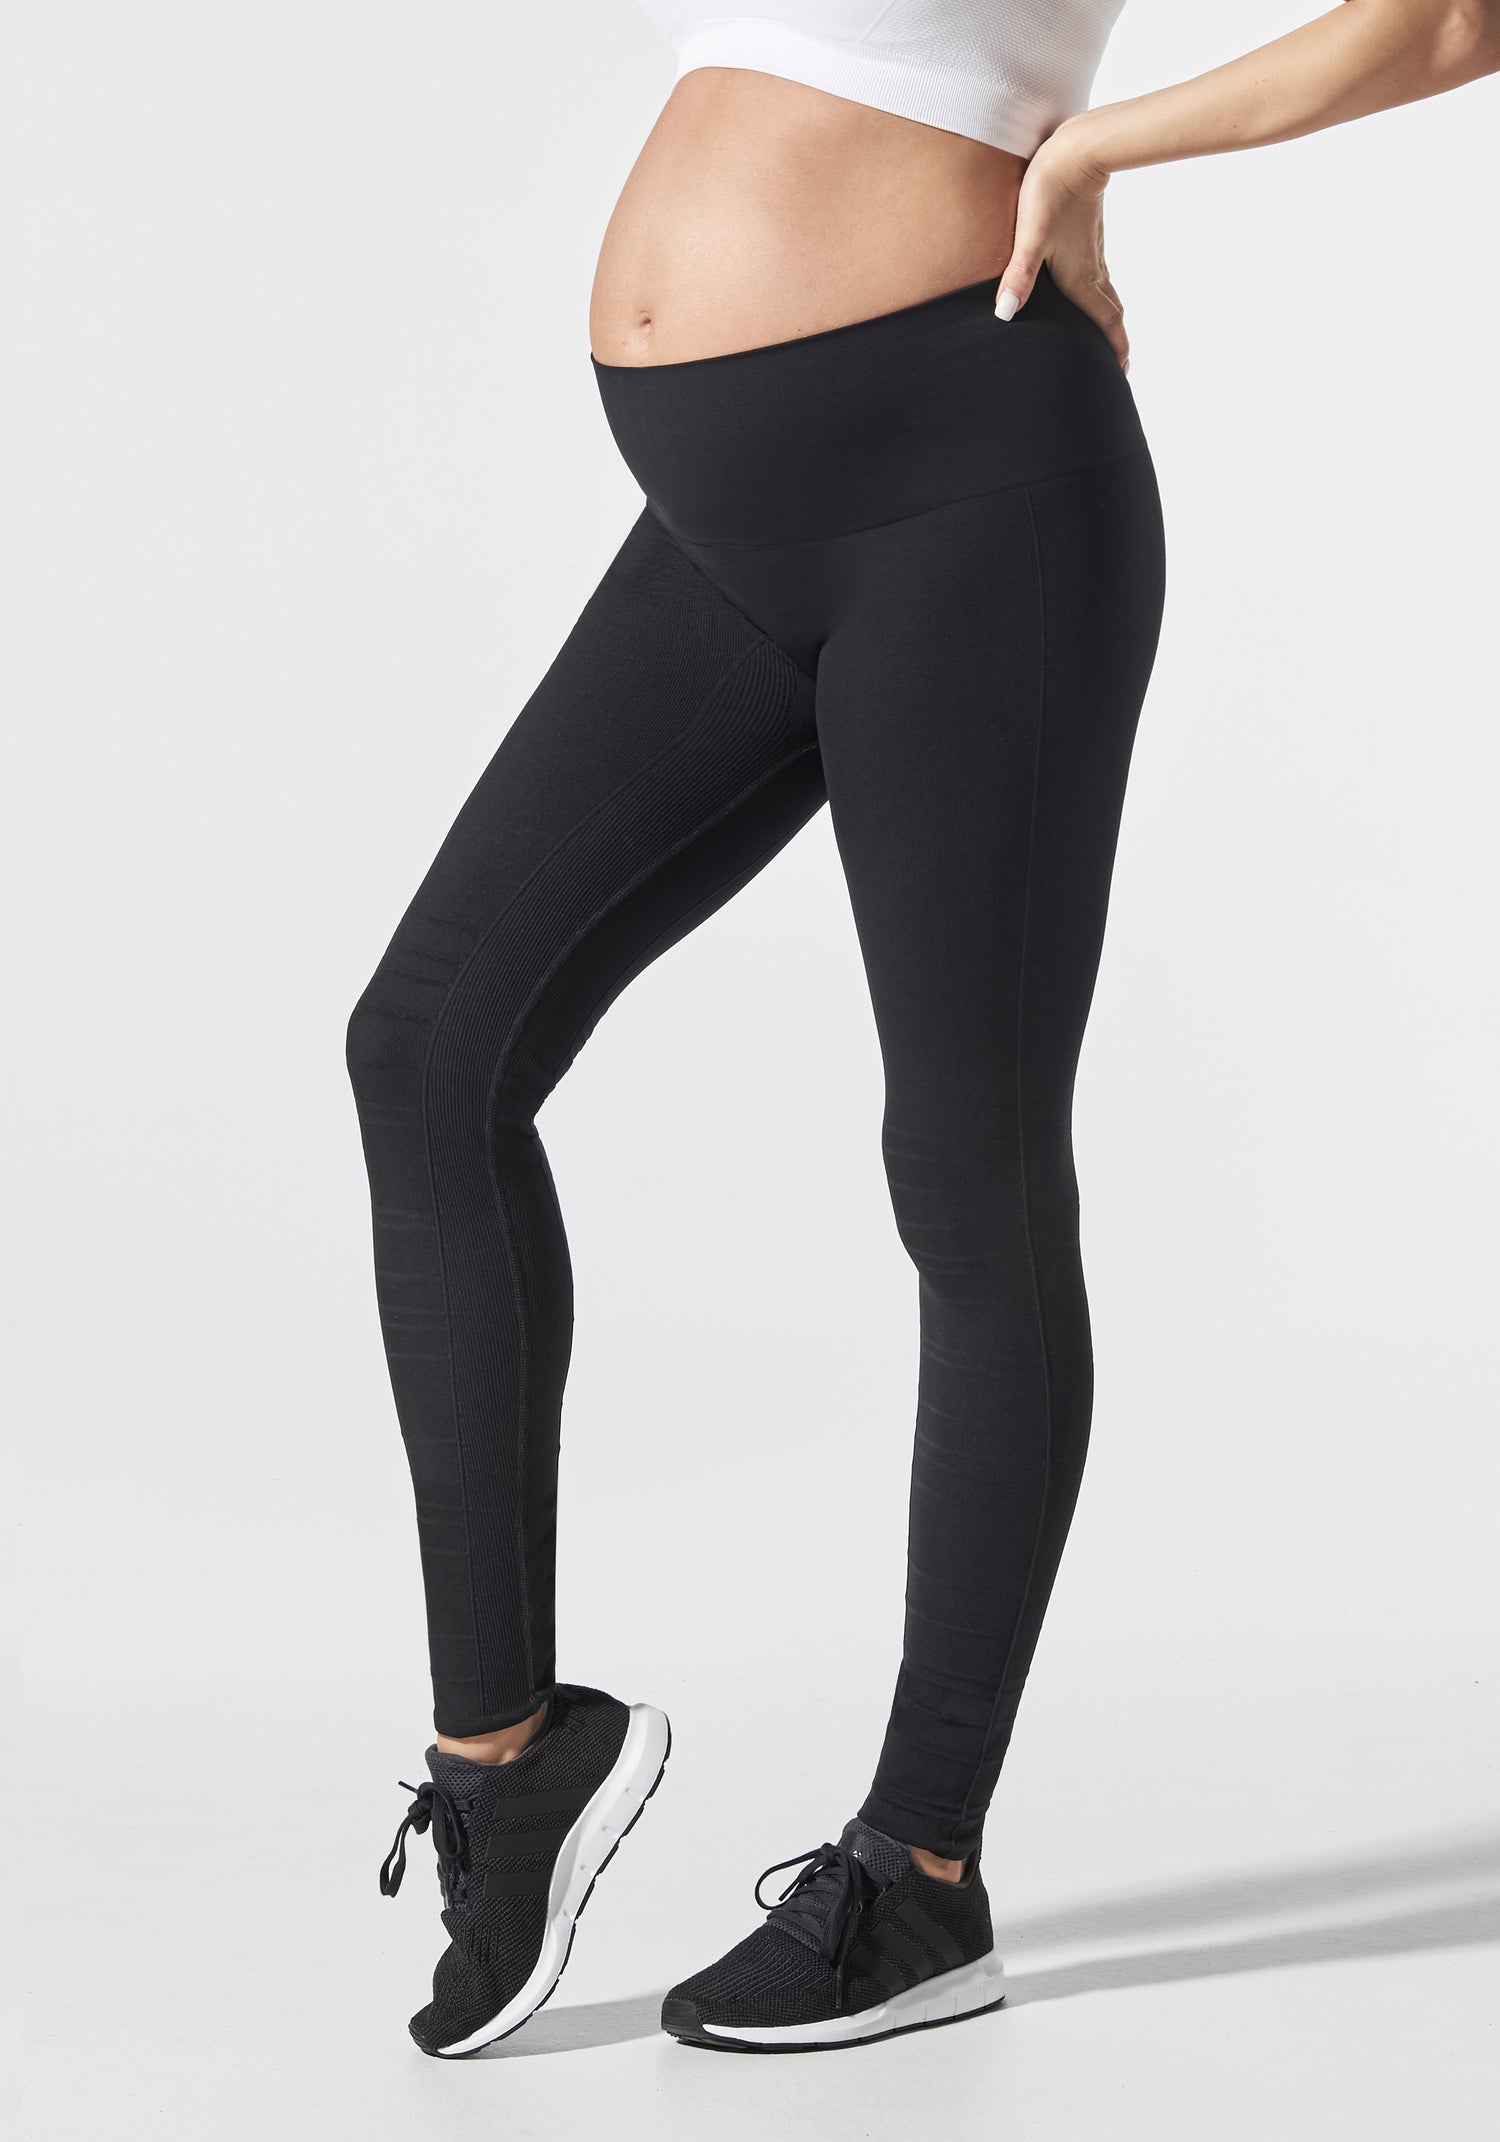 SportSupport® Hipster Cuffed Leggings